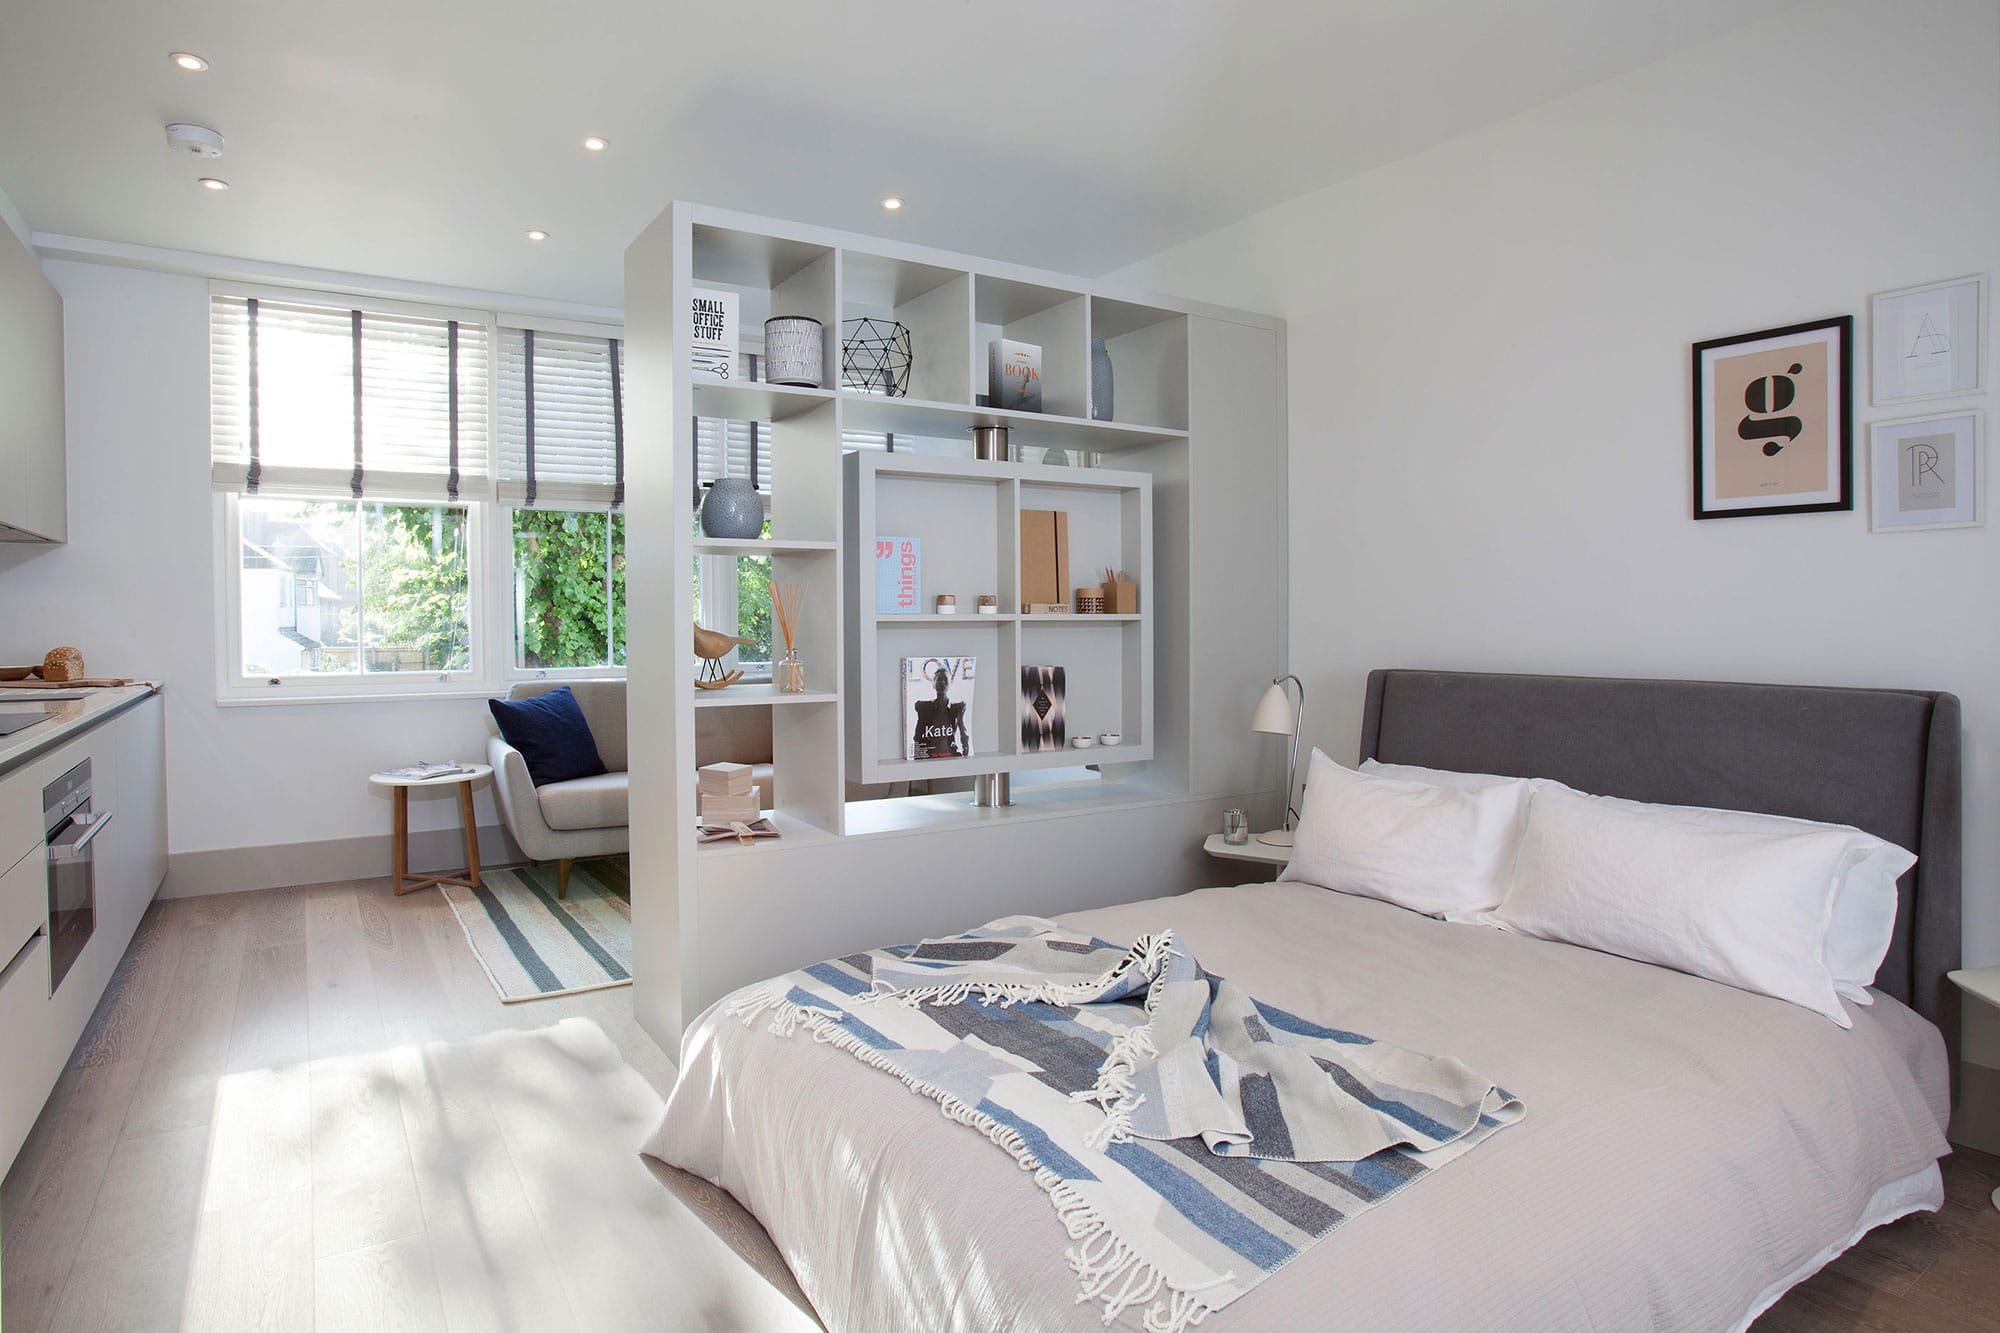 Small Bedroom Design Ideas To Make The Most Of Your Space